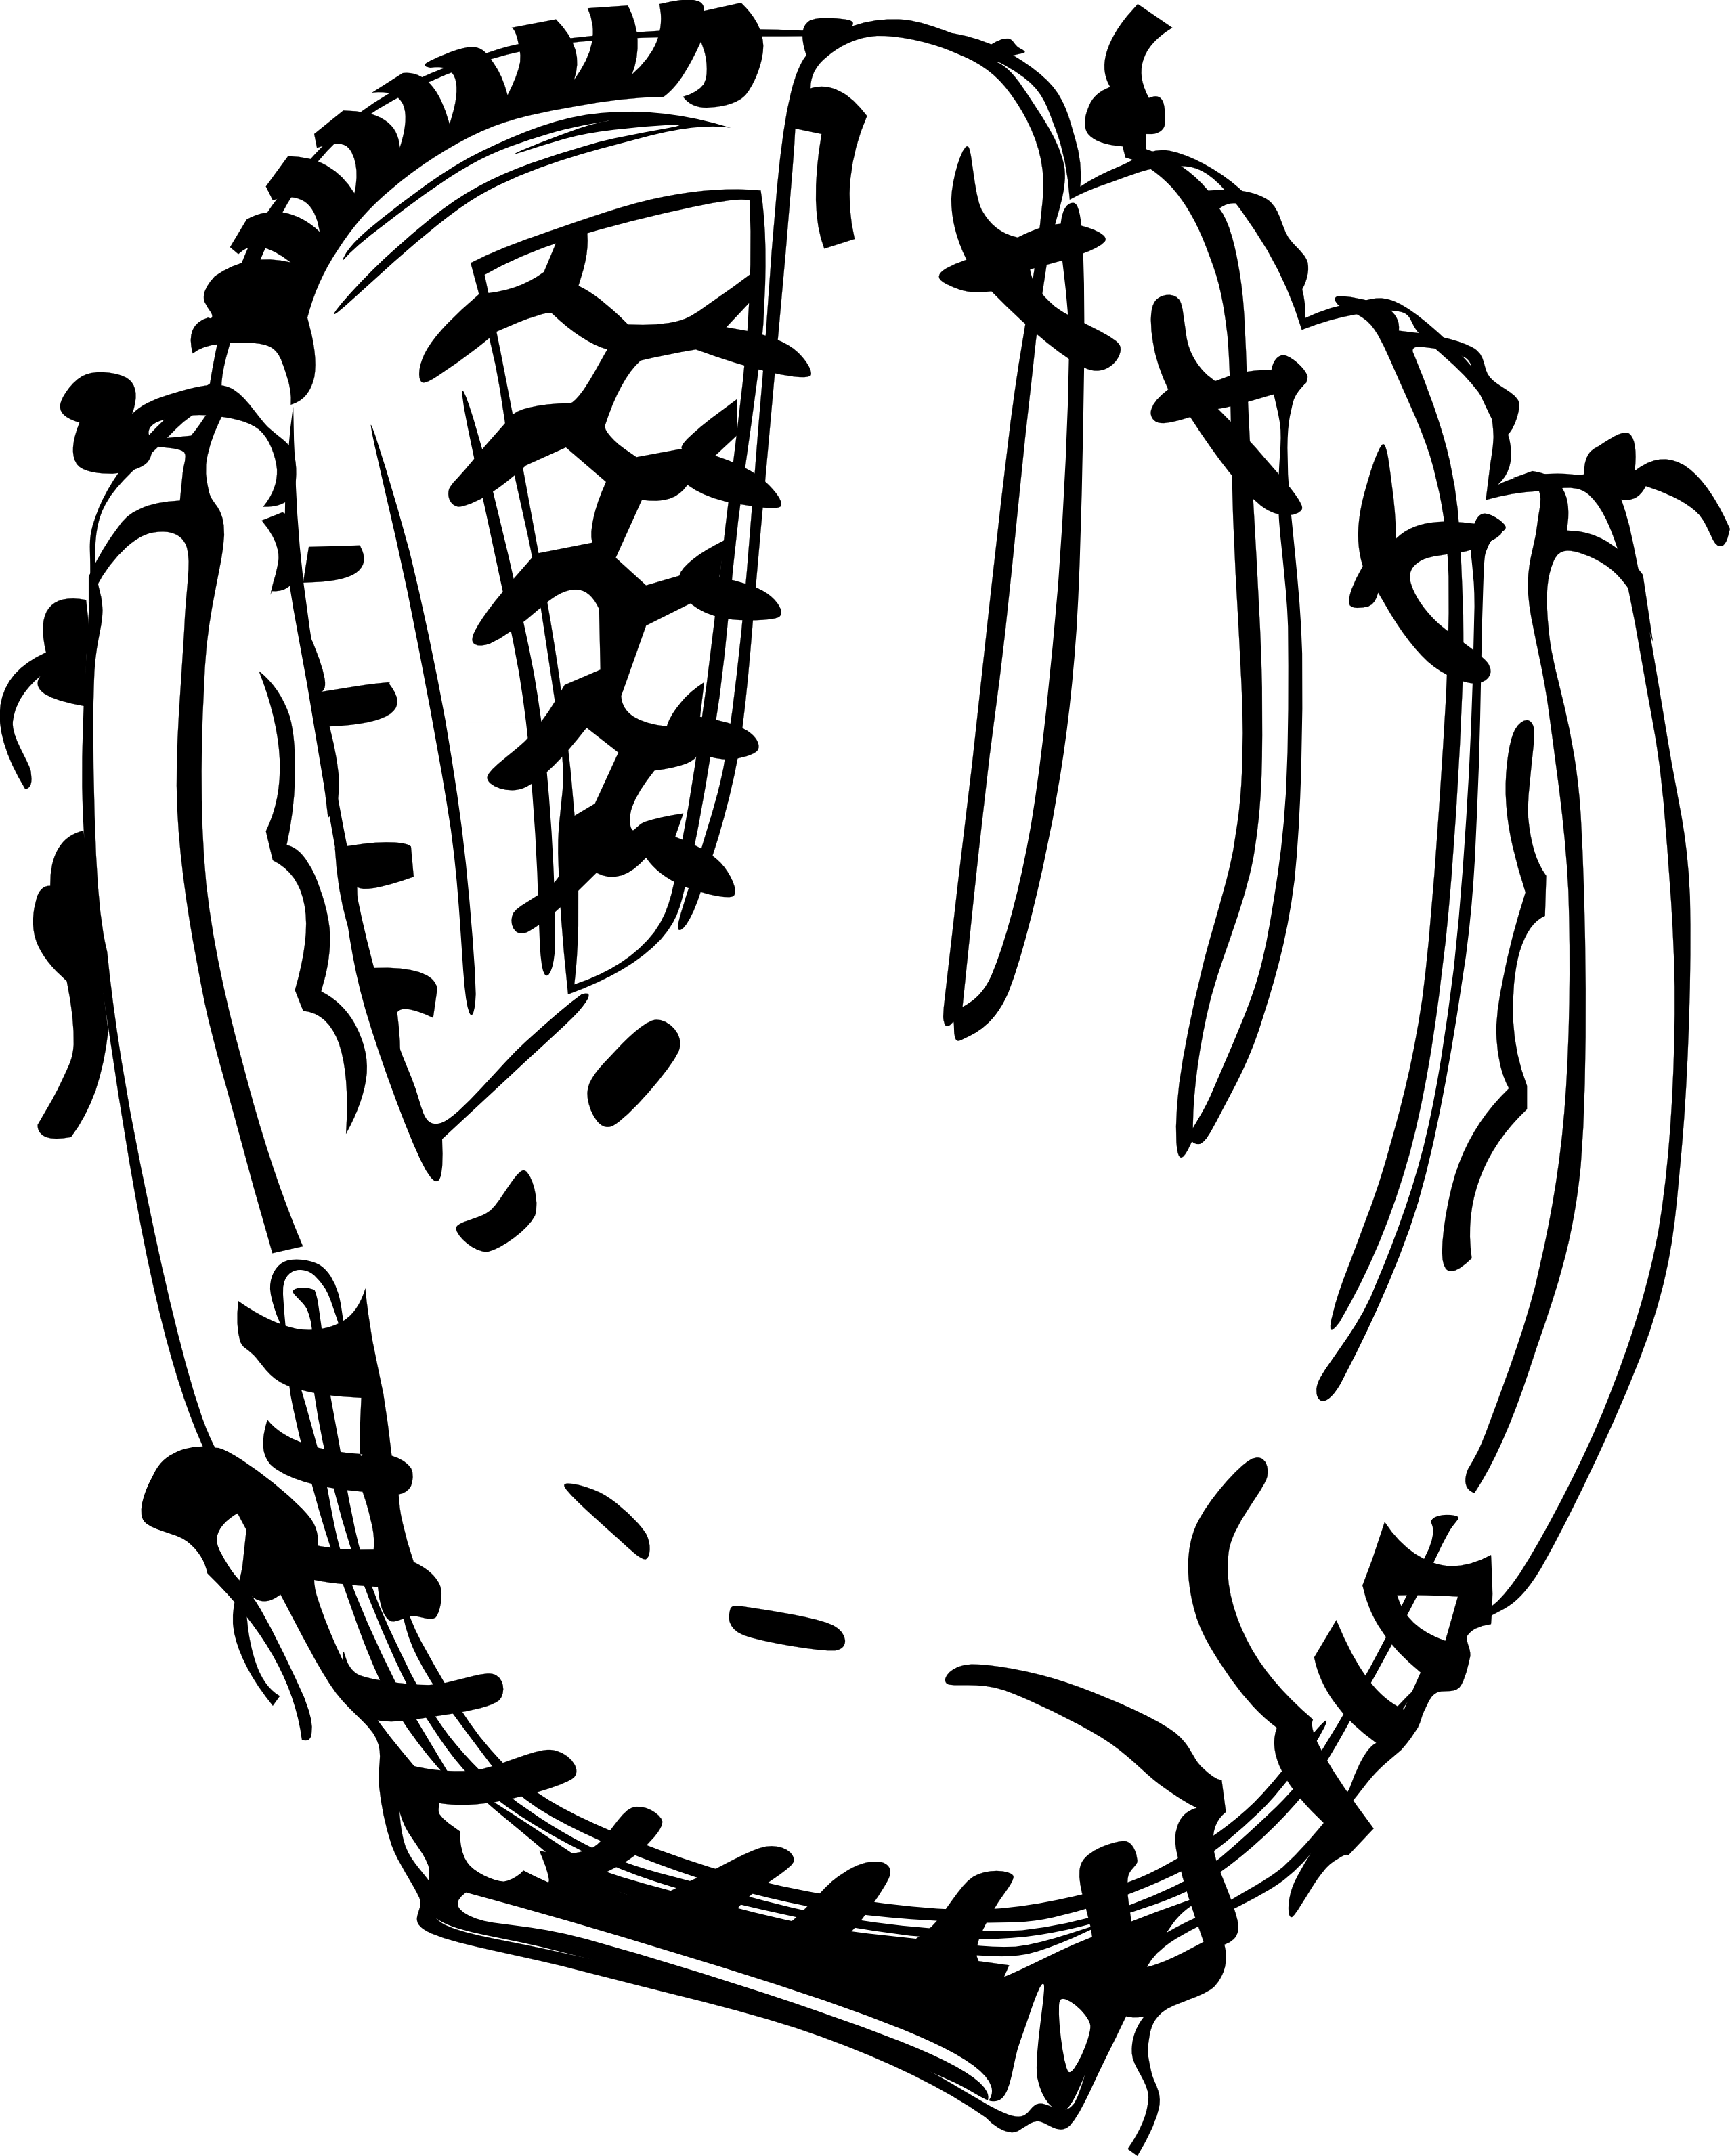 Baseball glove letters format. Refrigerator clipart black and white